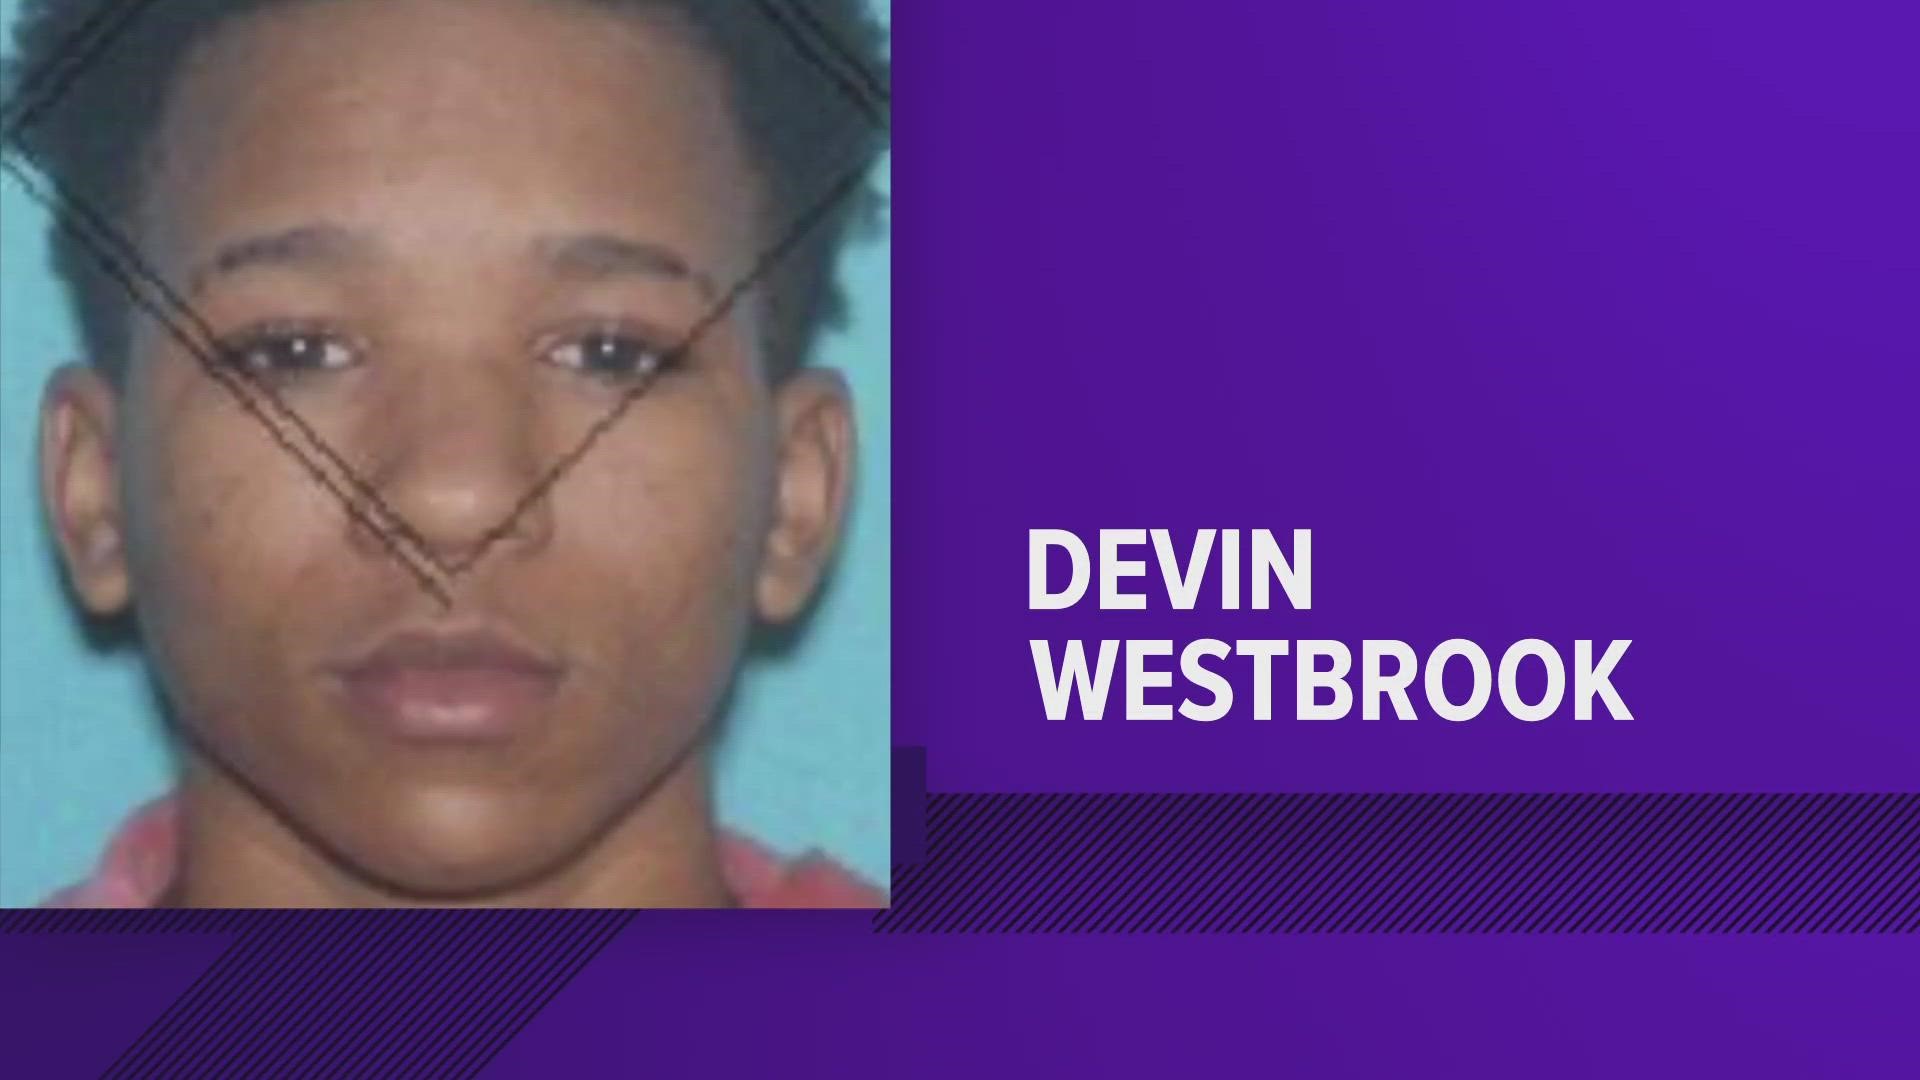 Oakland Police said Devin Westbrook was with officials at the Fast Pace Medical Center in the 7200 block of Highway 64 when he ran away.